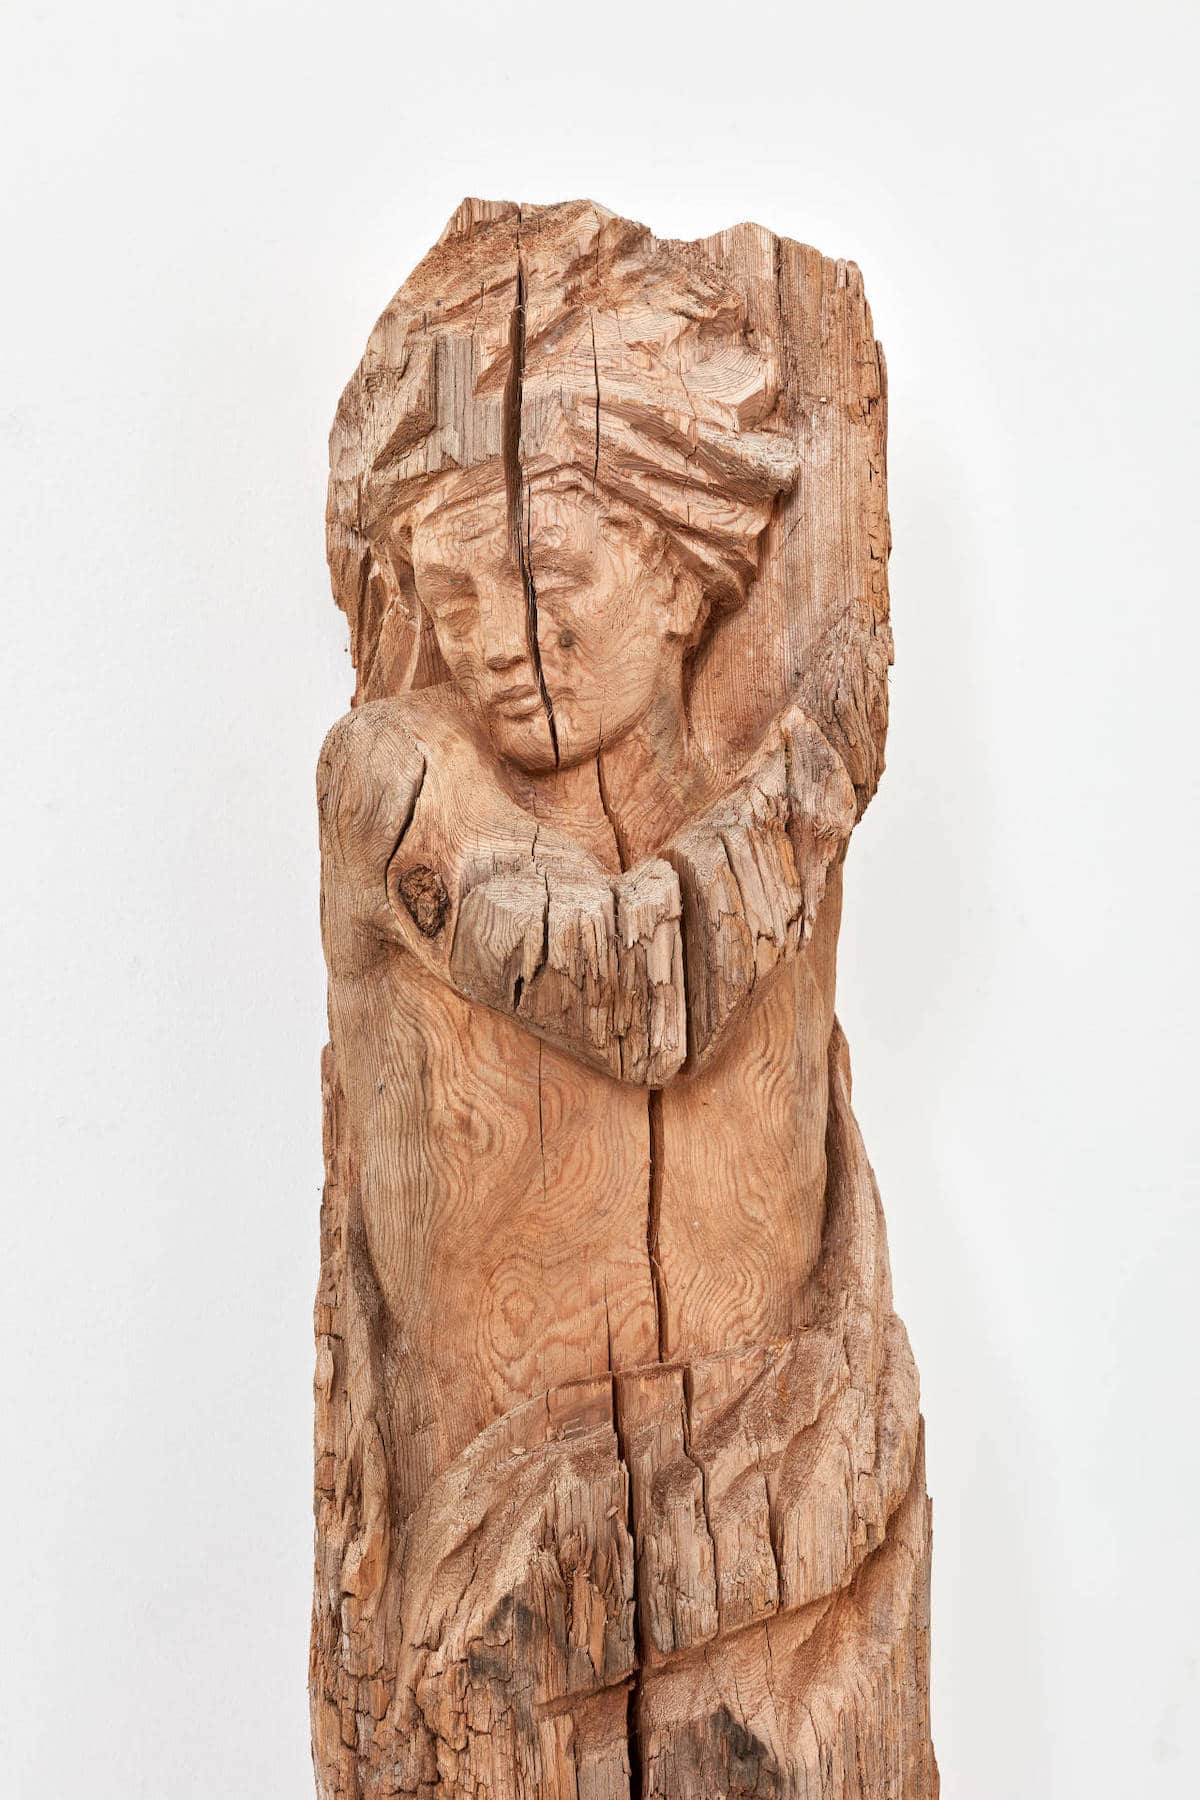 The History of Wood Carving in Art